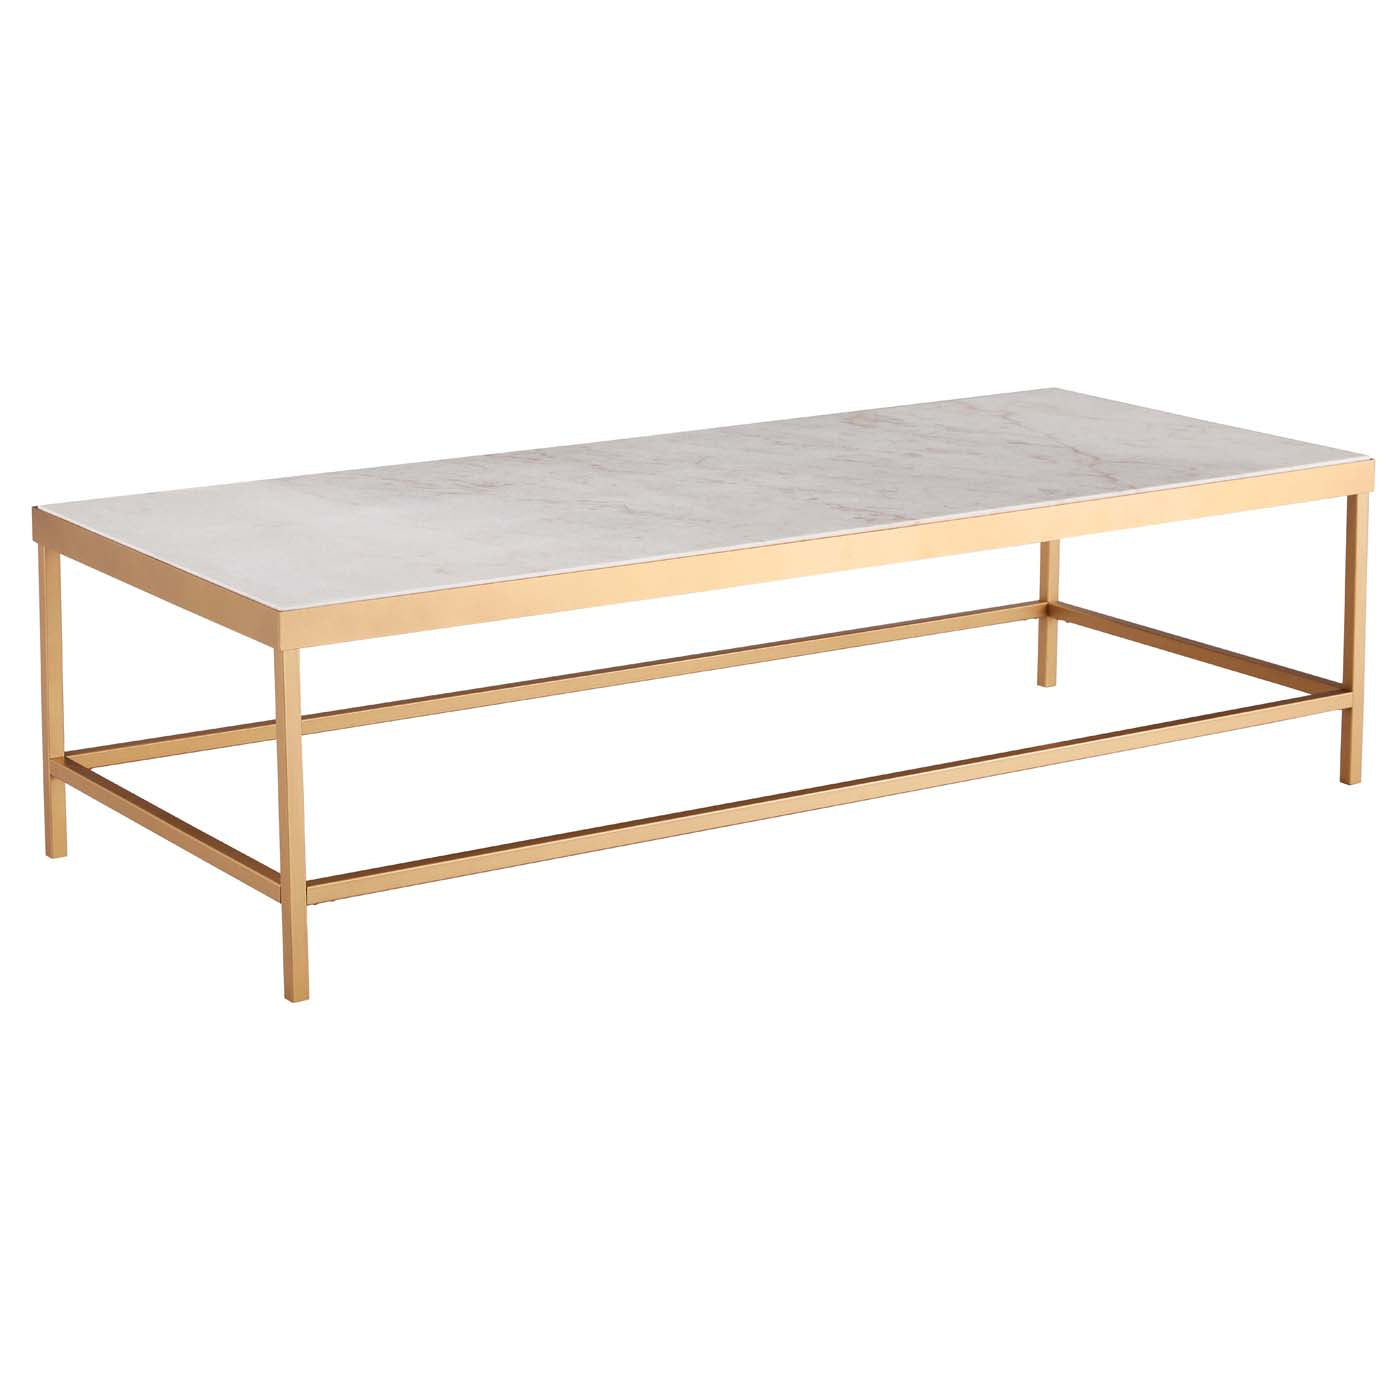 Safavieh Couture Caralyn Rectangle Marble Coffee Table - White / Brass